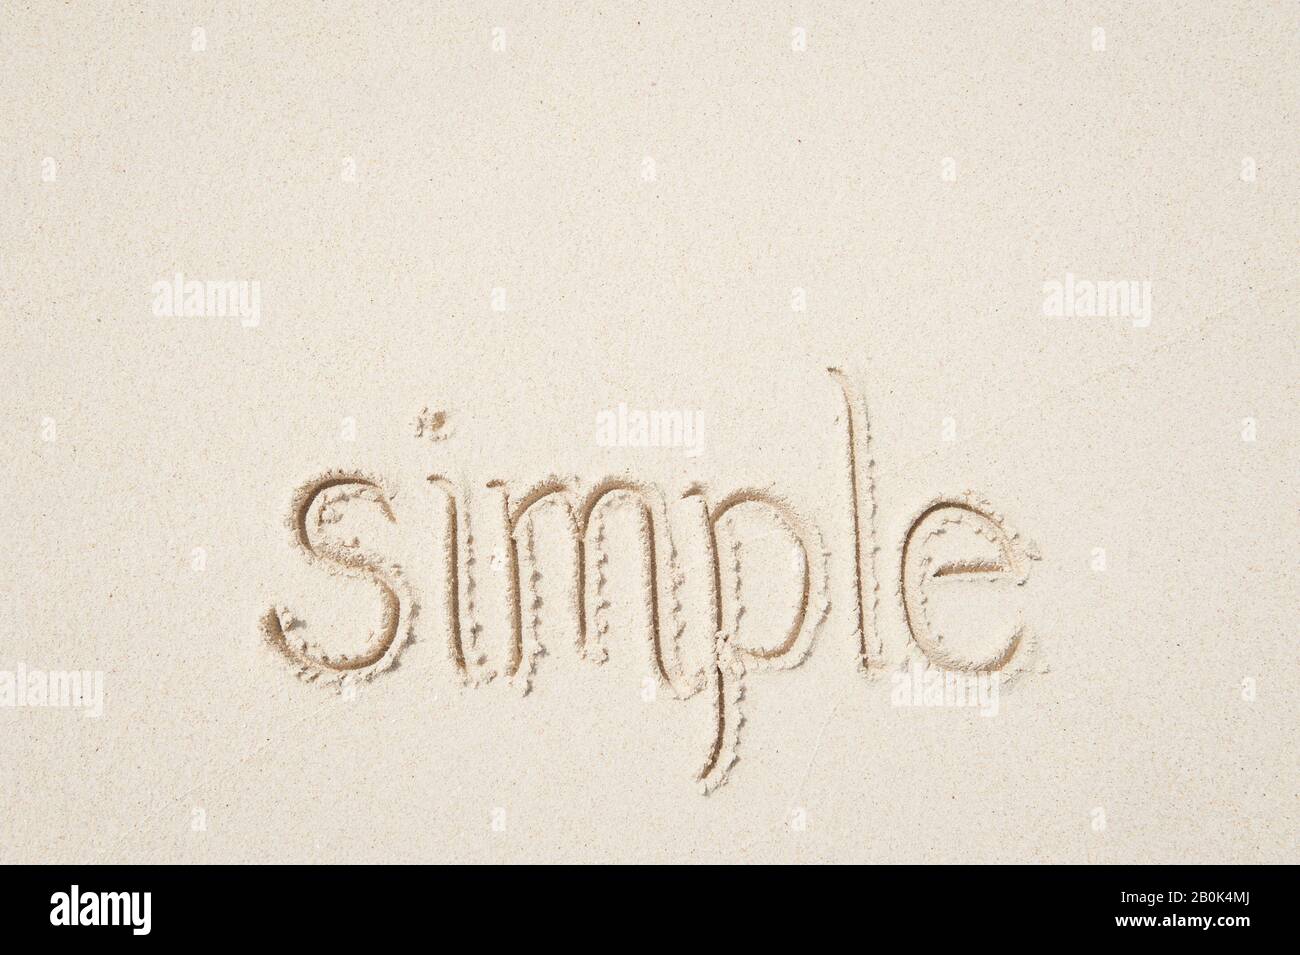 Simple message of simplicity handwritten outdoors on clean smooth sand beach Stock Photo